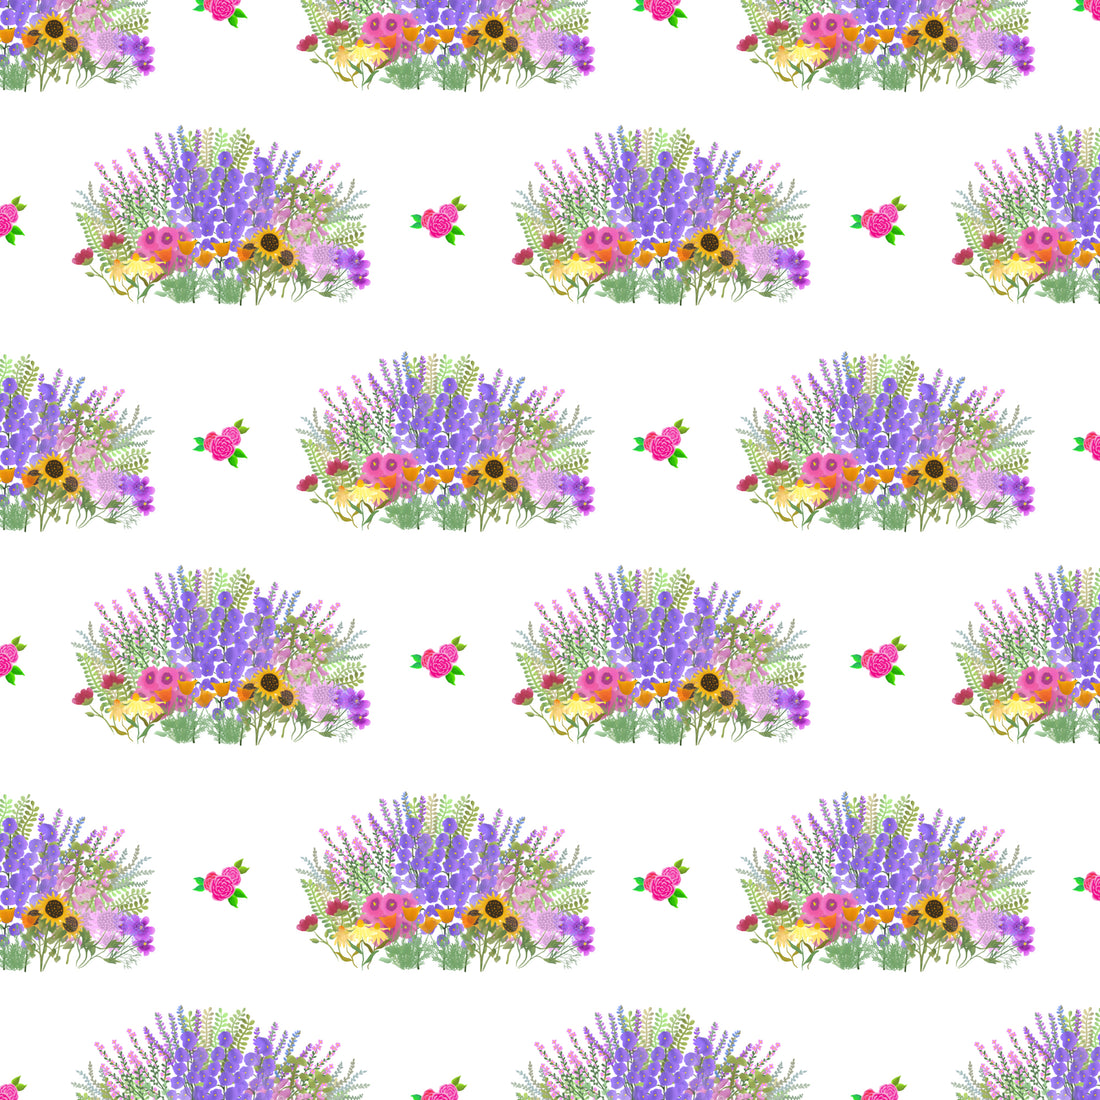 New English Garden Fabric & Wallpaper Collection for Spring and Summer